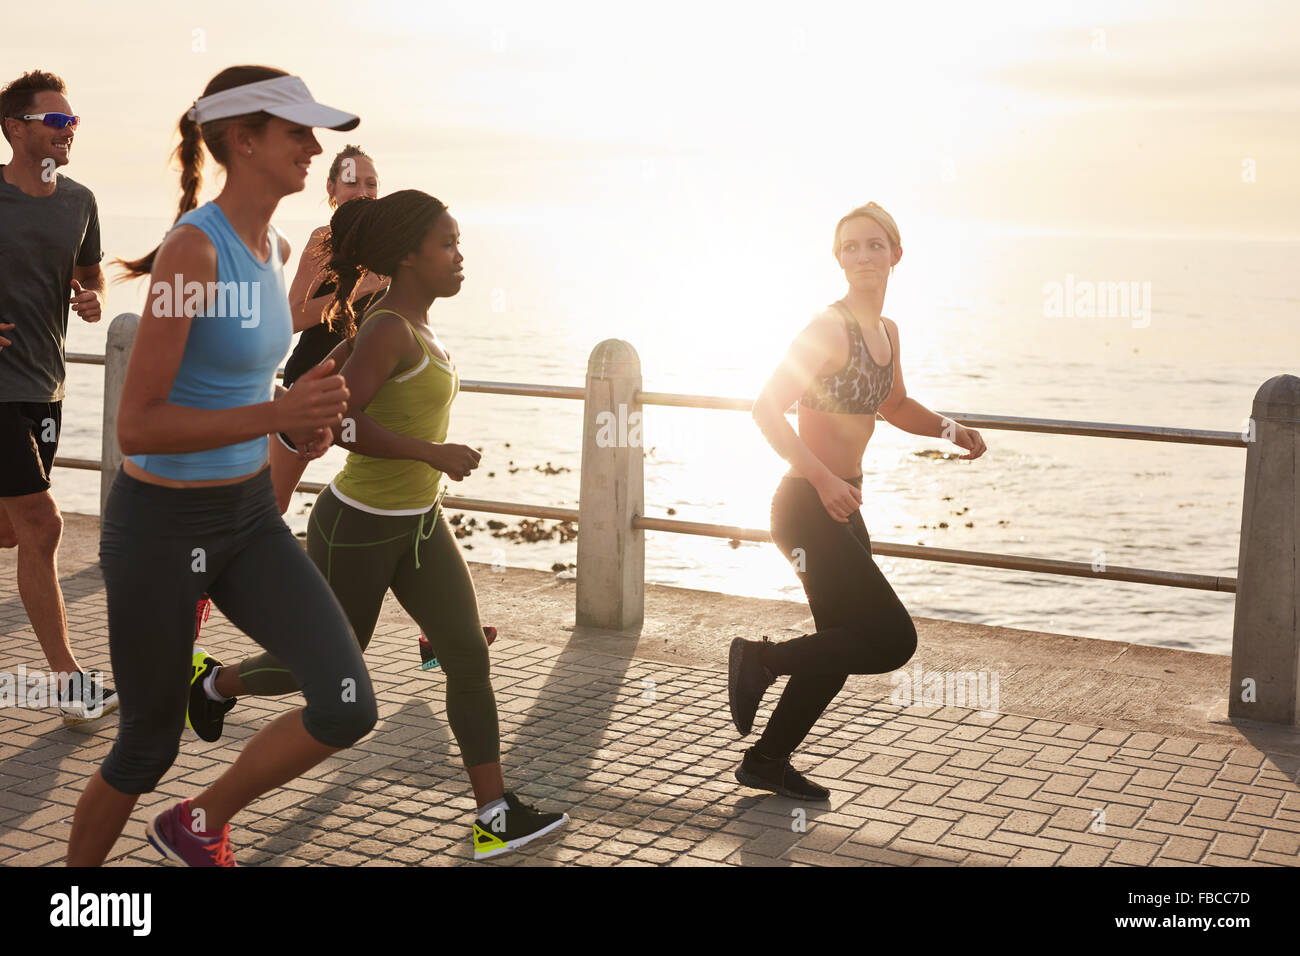 Young people running along seaside at sunset. Closeup image of group of runners working out on a road by the sea. Stock Photo